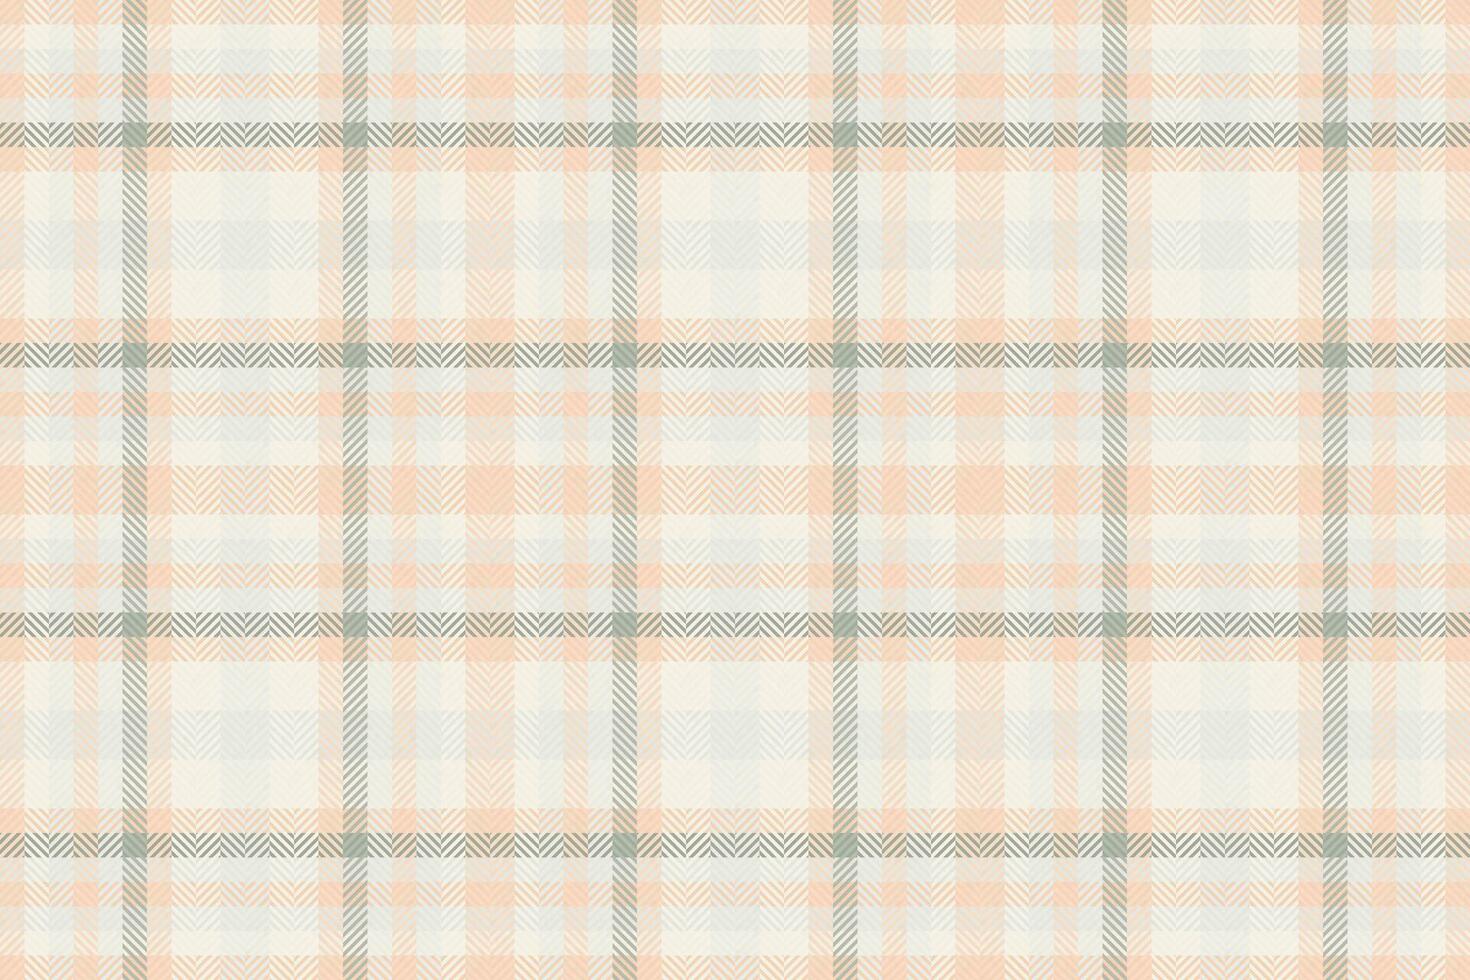 Italian textile seamless check, coloured fabric texture tartan. Online background pattern vector plaid in light and linen colors.